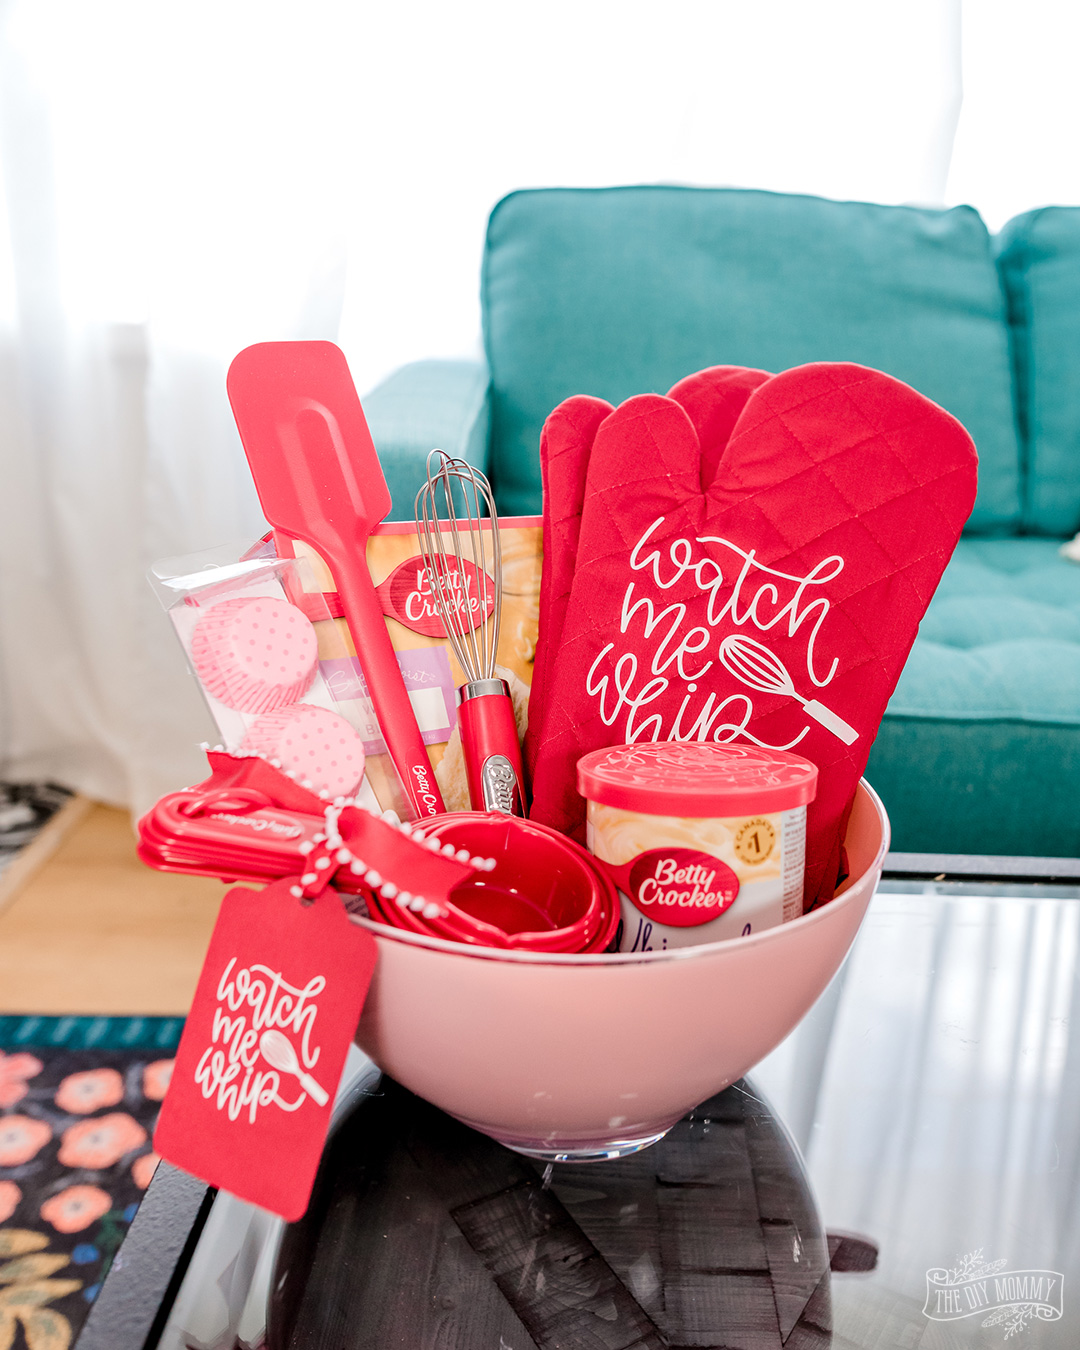 DIY Gift Basket Ideas using dollar store items + personalized details!